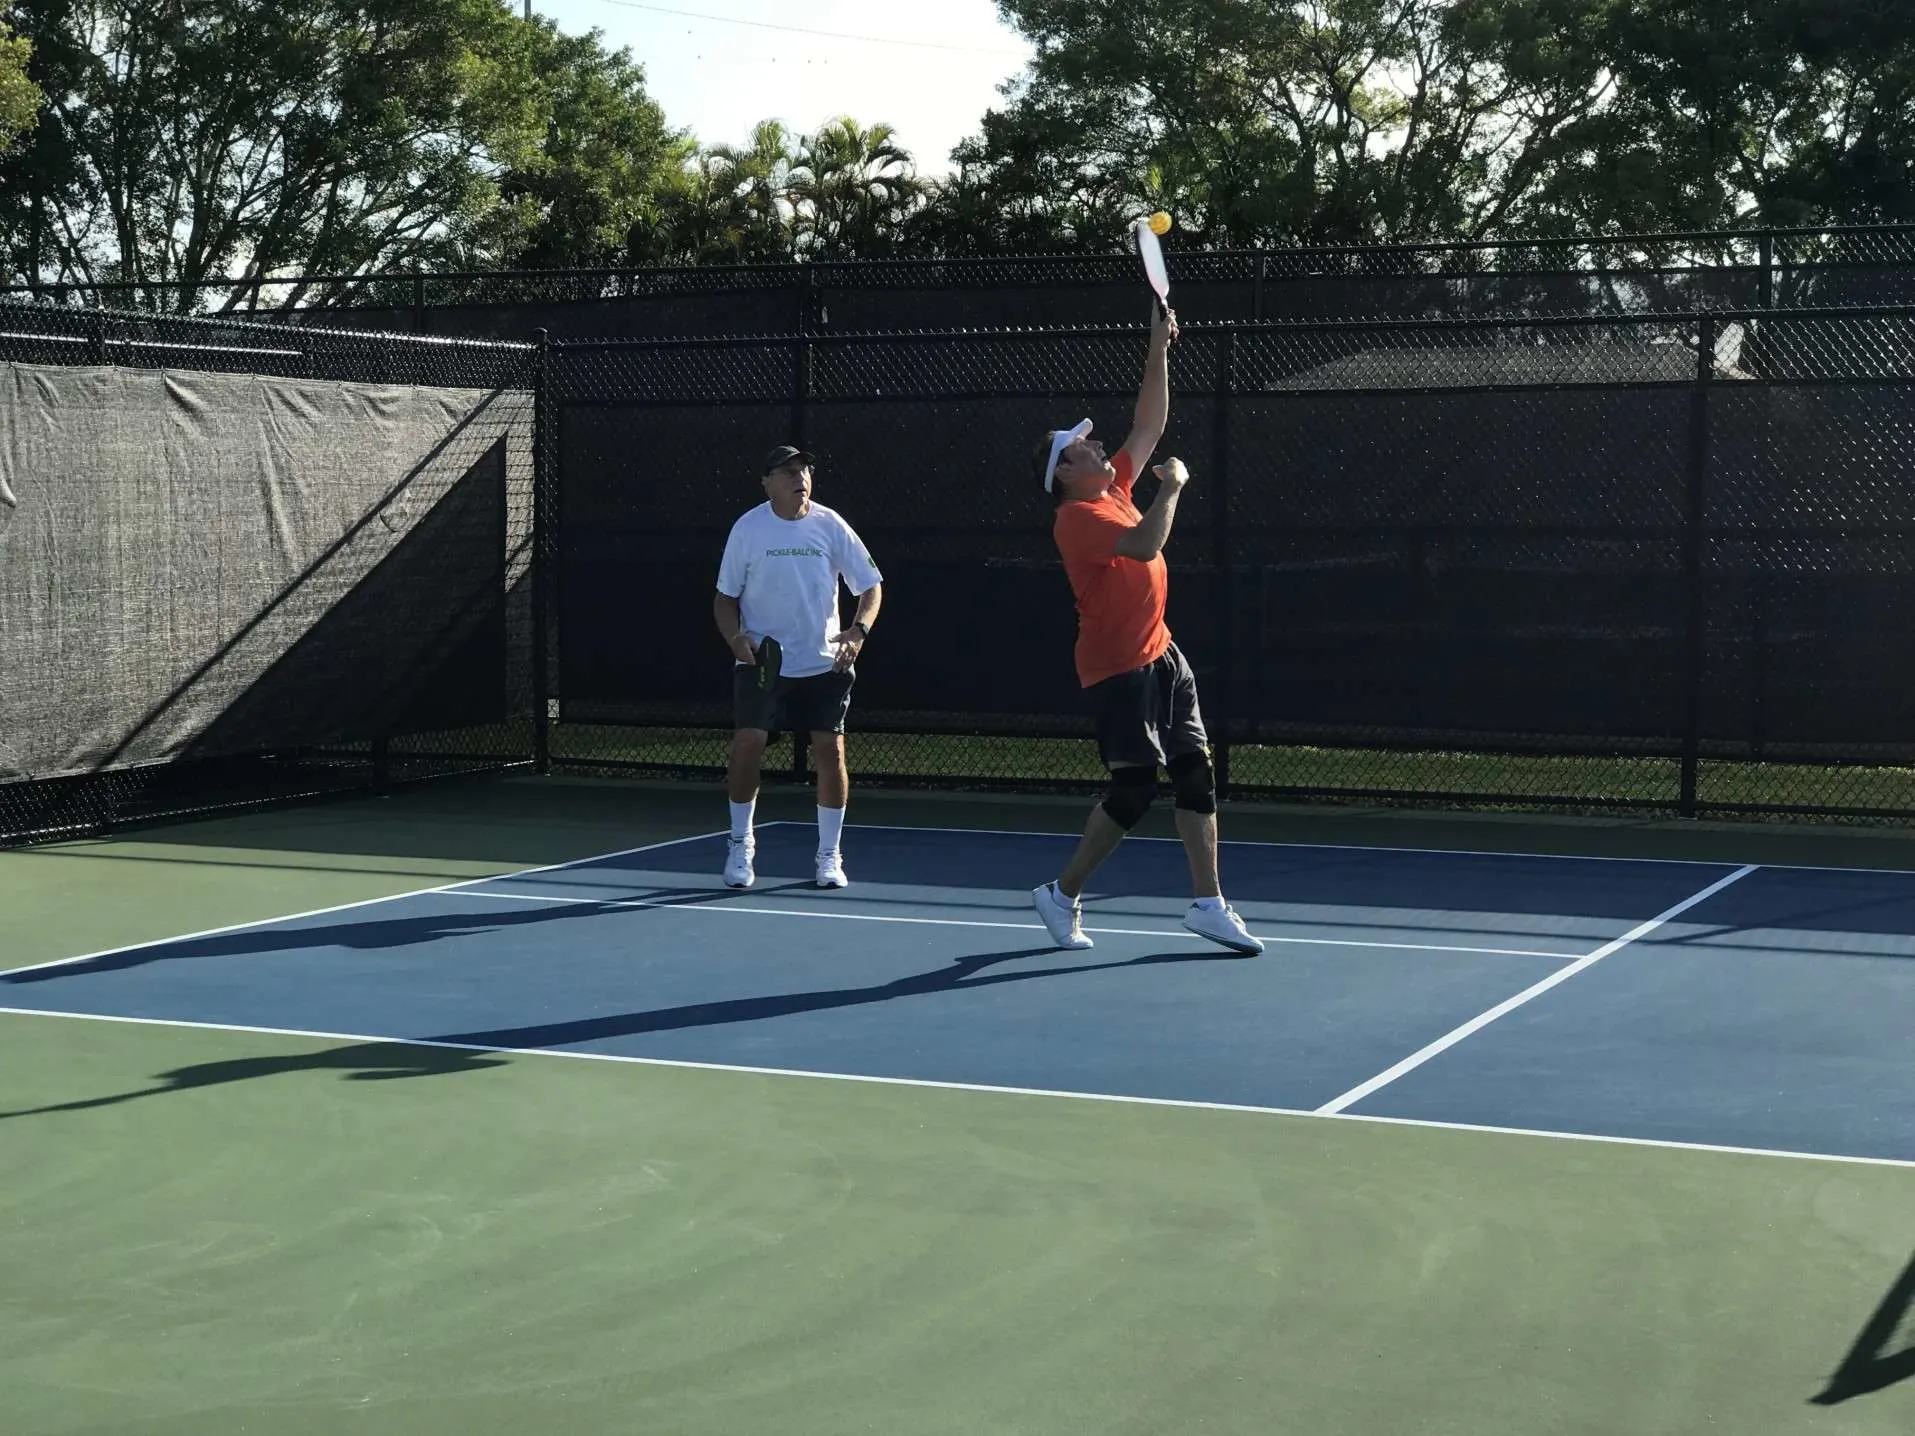 Two men playing pickleball together.